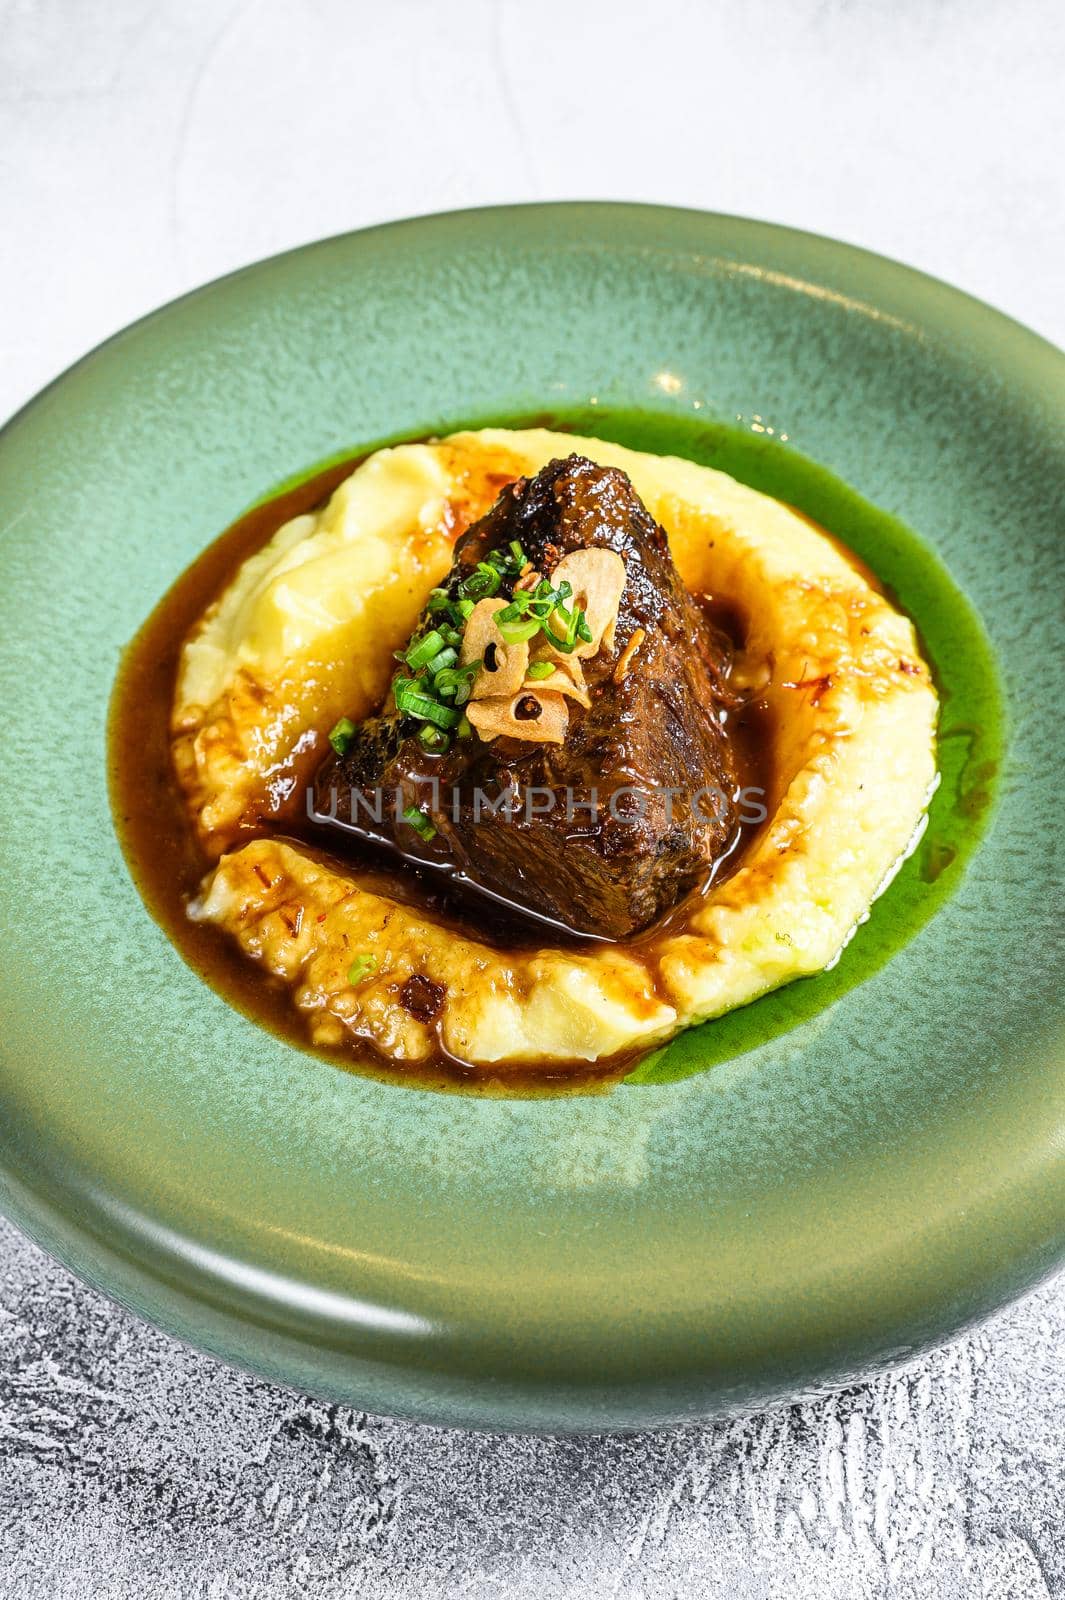 Beef sirloin fillet steak with a side dish of mashed potatoes. Gray background. Top view. Copy space.